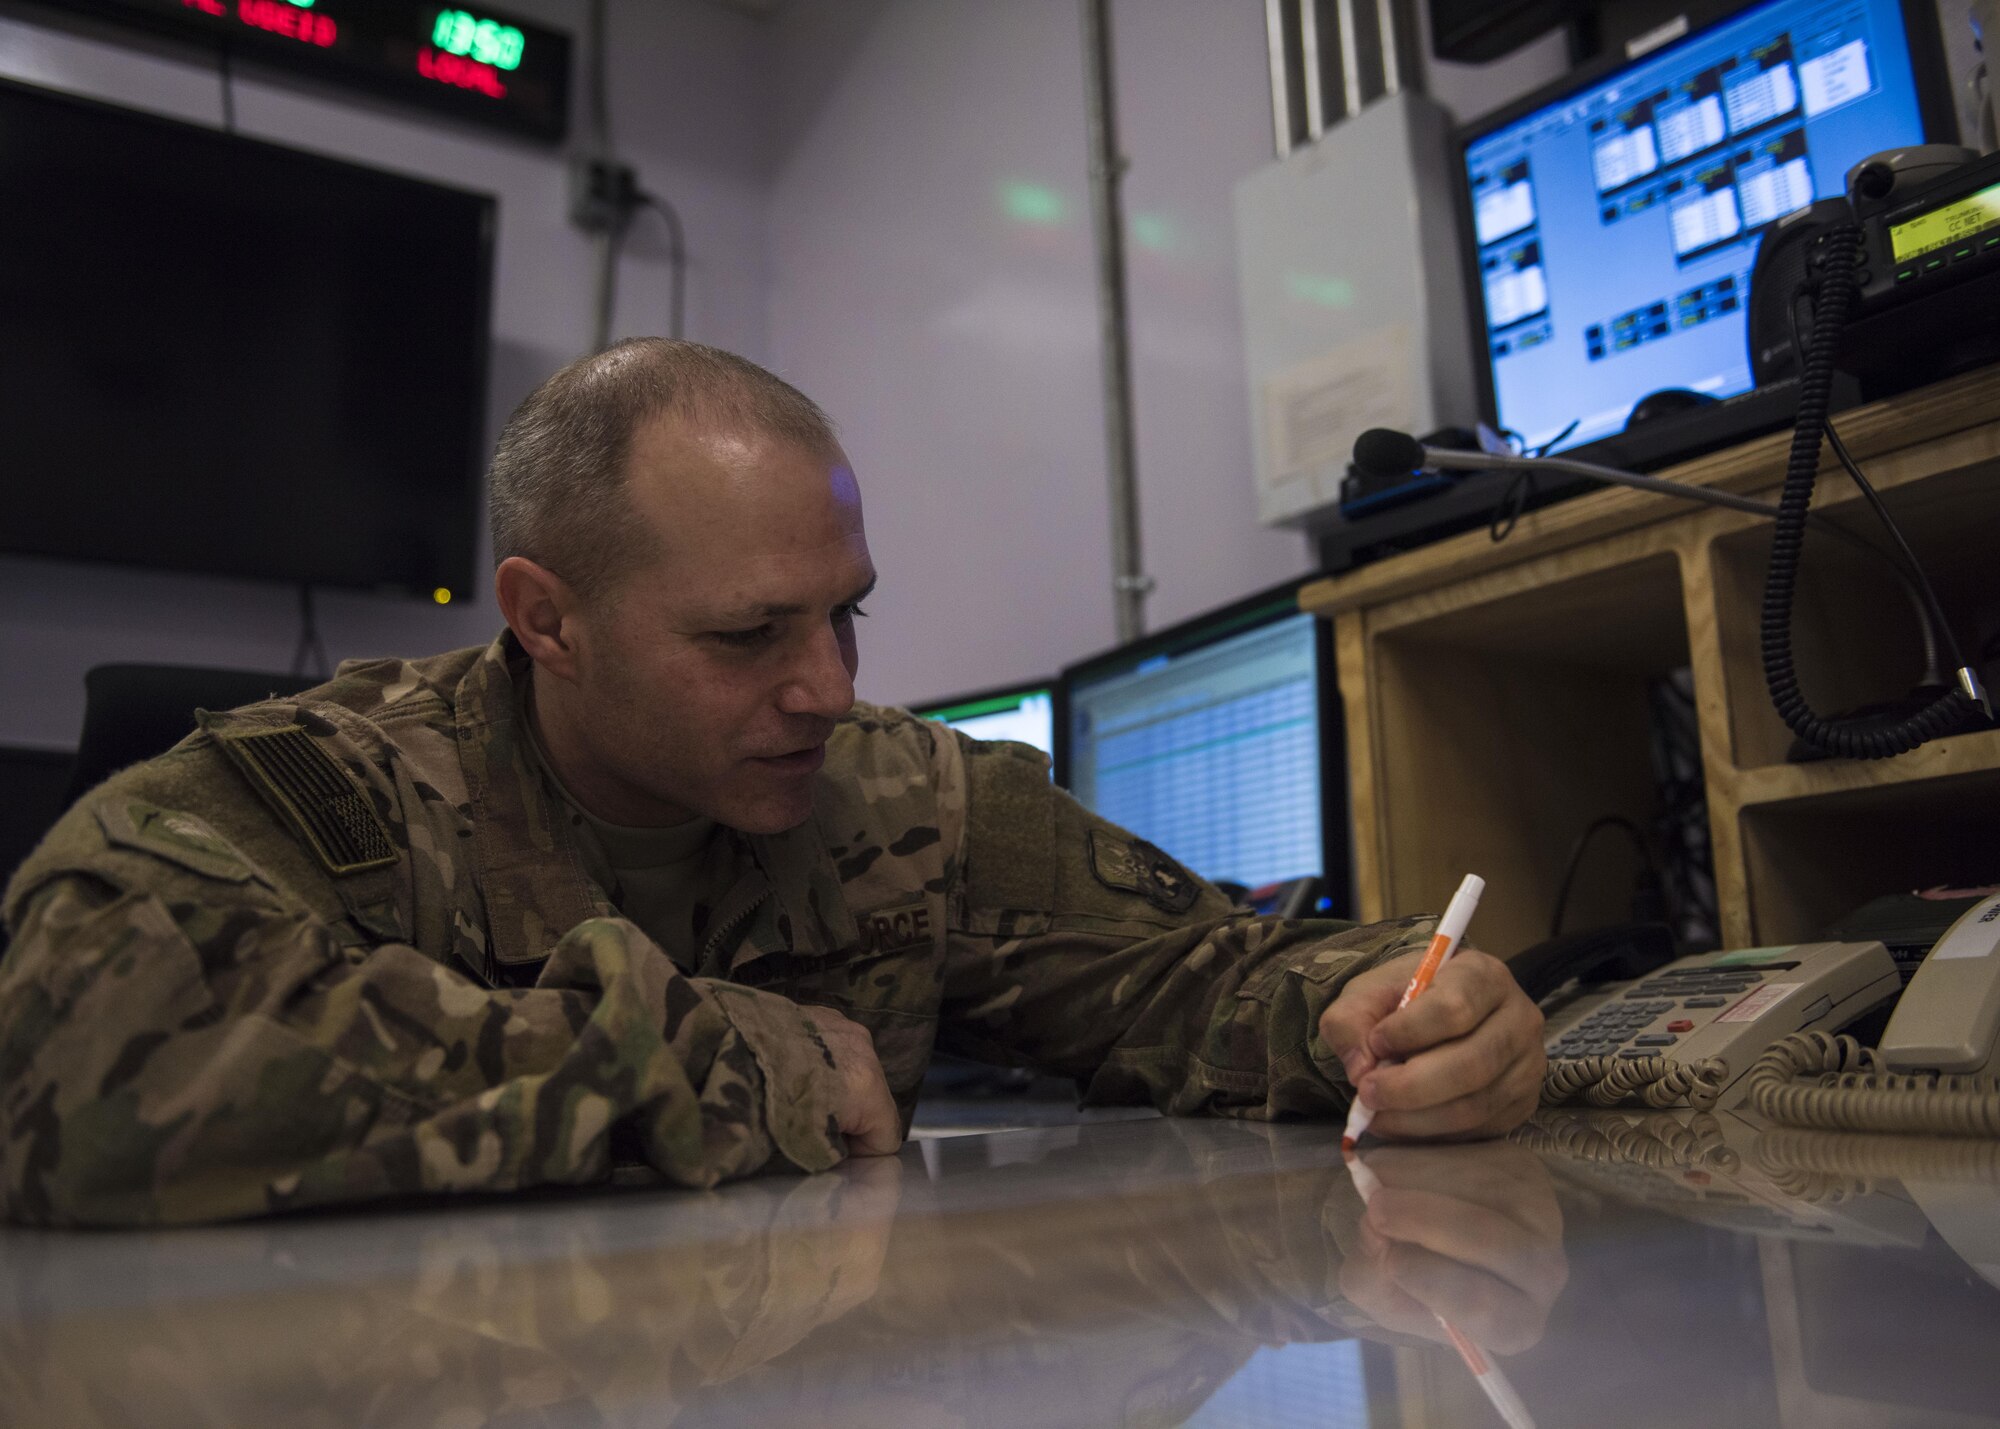 Tech. Sgt. Alexander Mears, 455th Air Expeditionary Wing senior command post controller, marks a weather warning checklist, July 11, 2016, Bagram Airfield, Afghanistan. The weather warning checklist helps ensure command post personnel notify all flightline personnel and aircraft if there happens to be safety concerns. (U.S. Air Force photo by Senior Airman Justyn M. Freeman)